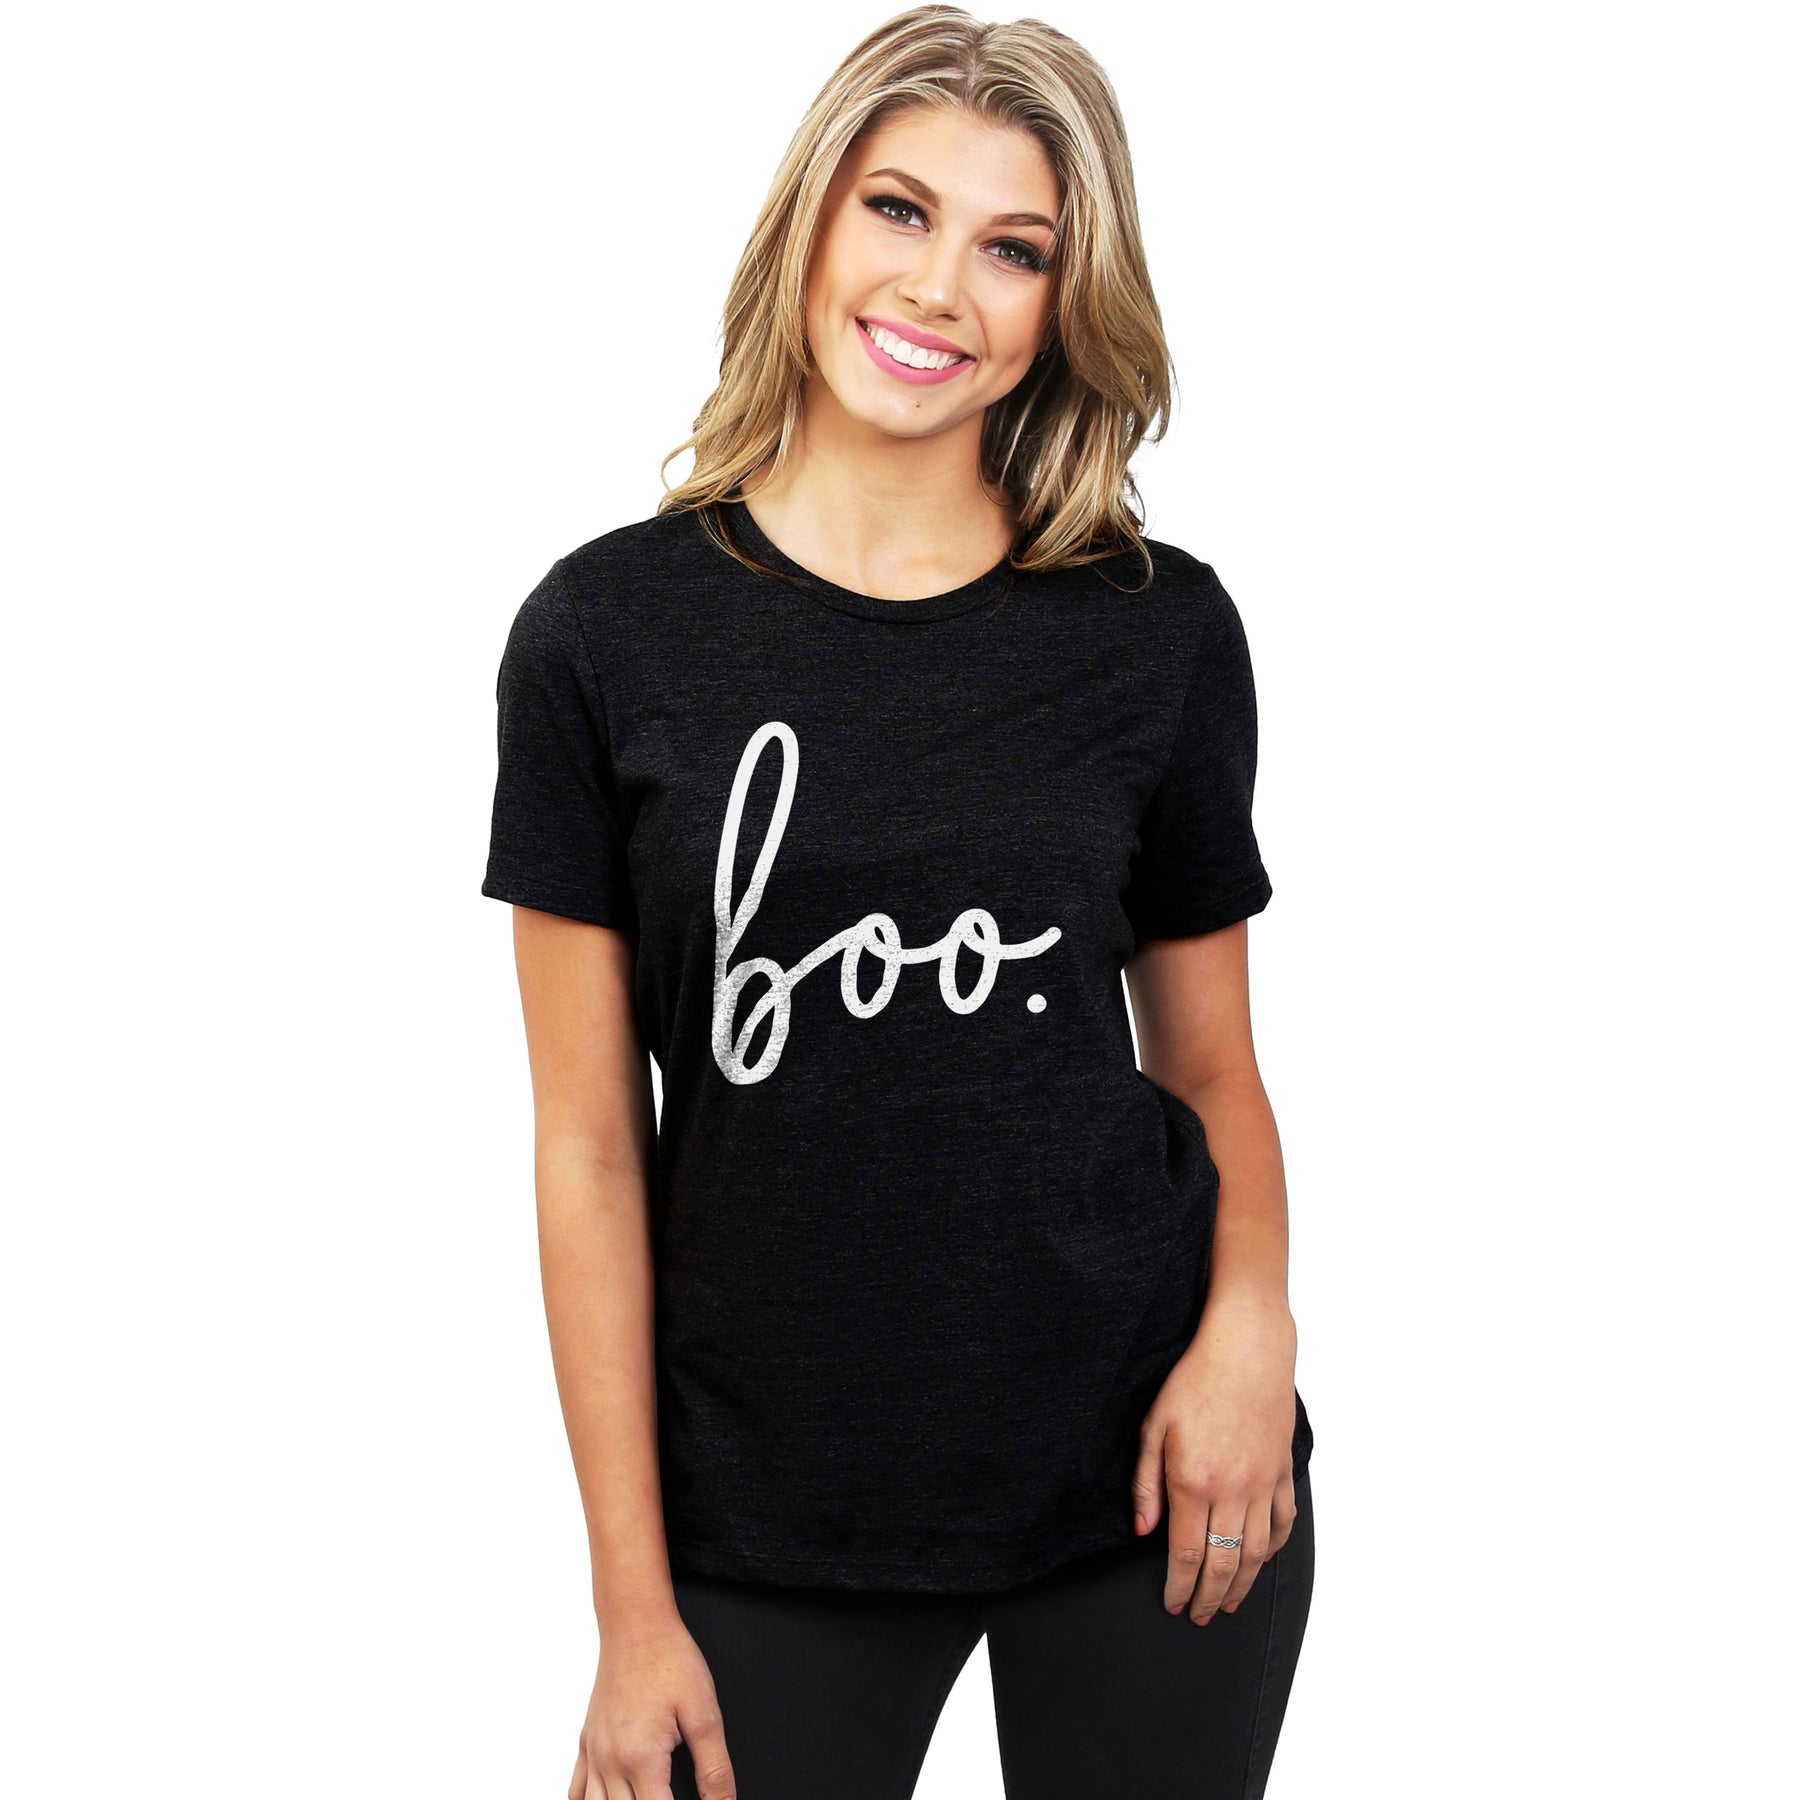 Boo Cursive Women's Relaxed Crewneck Graphic T-Shirt Top Tee Pink ...